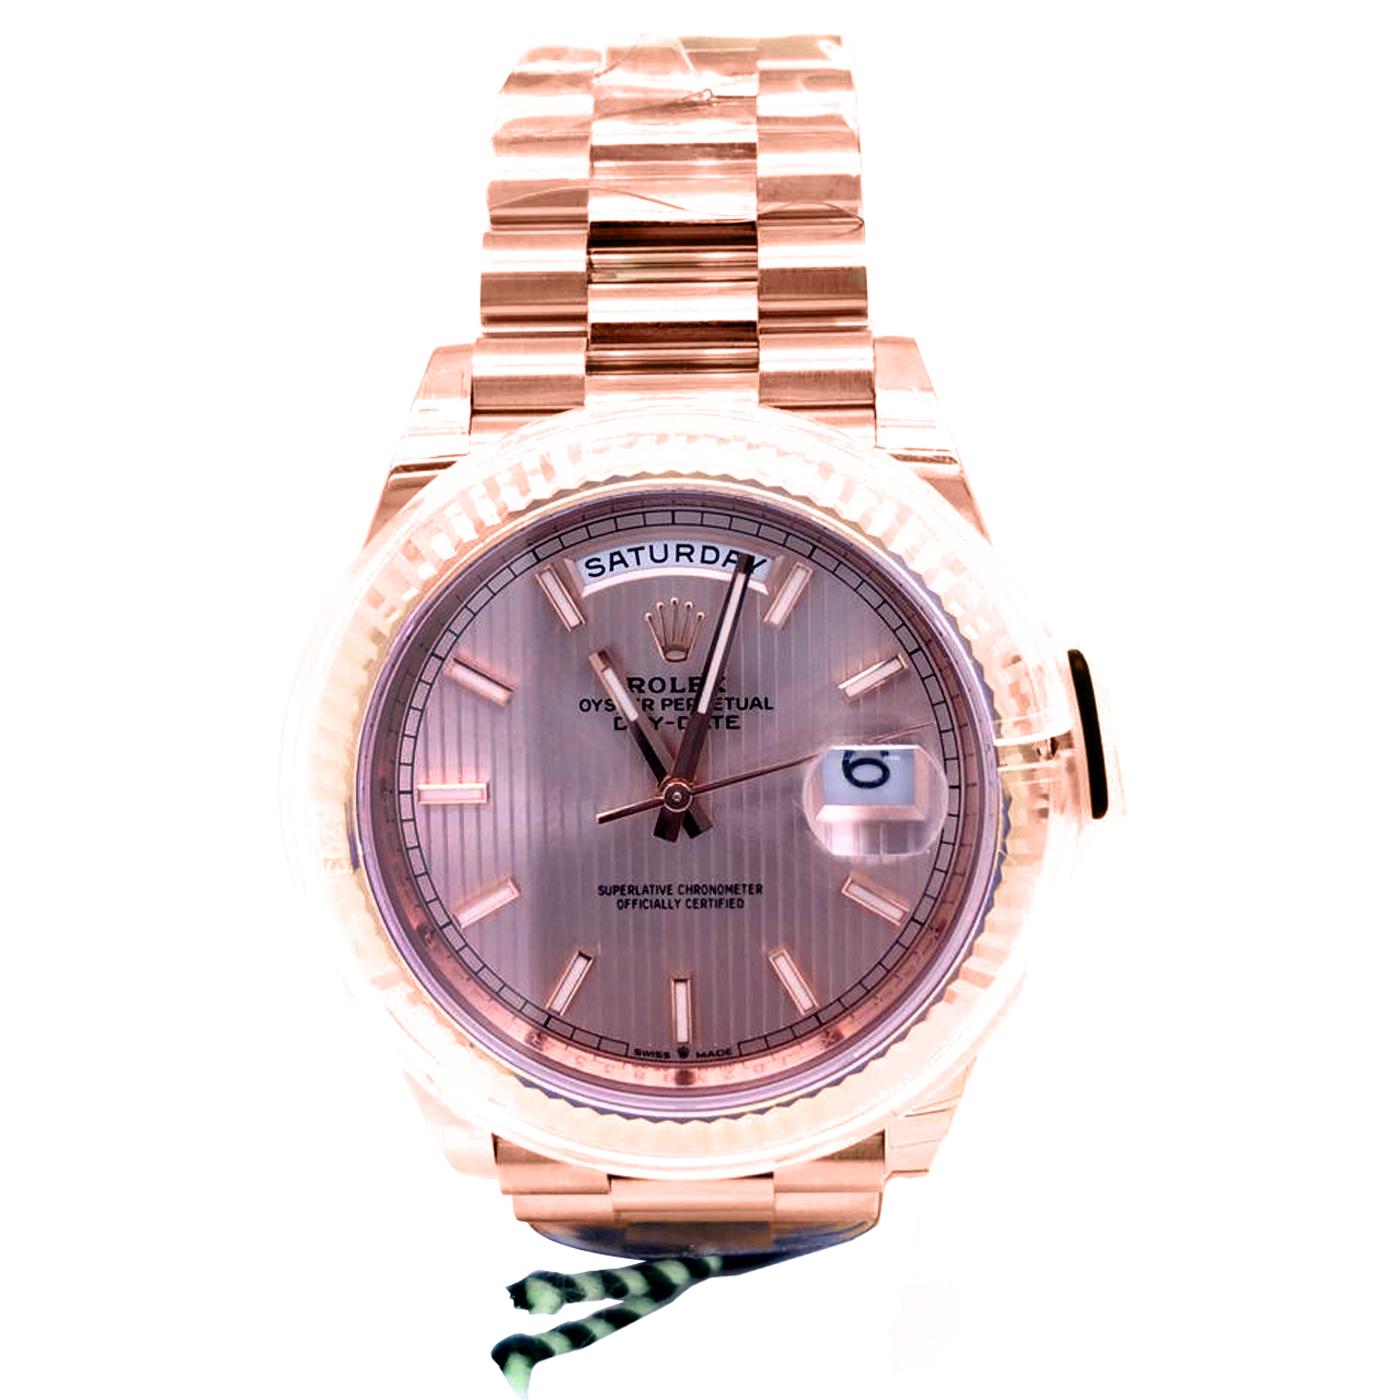 The Oyster Perpetual Day-Date 40 in 18 ct Everose gold with chocolate, diamond-set dial, fluted bezel, and a President bracelet. The Day-Date was the first watch to indicate the day of the week spelled out in full when it was first presented in